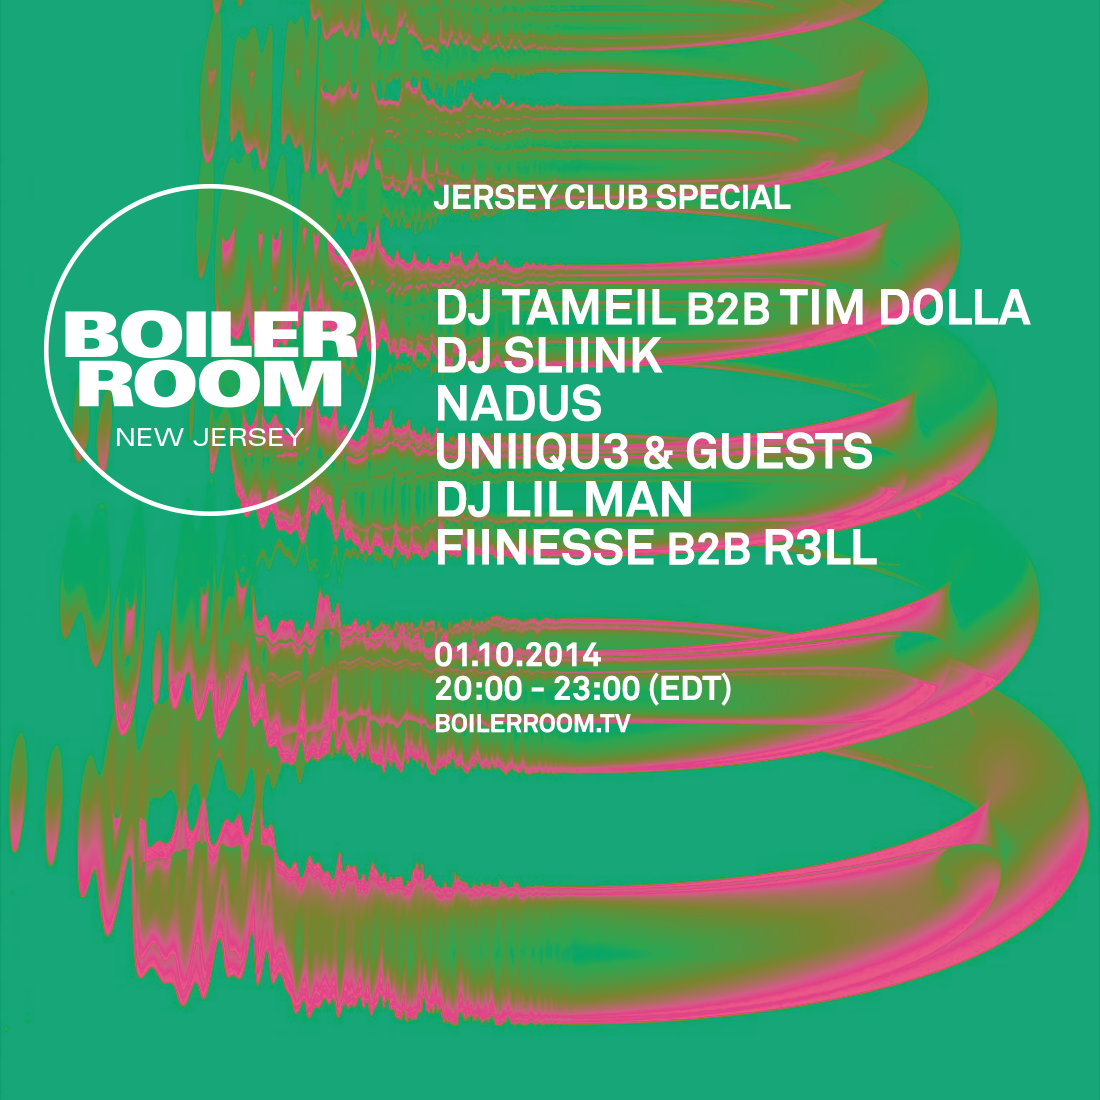 Boiler_Room_JERSEY_CLUB_SQUARE_update